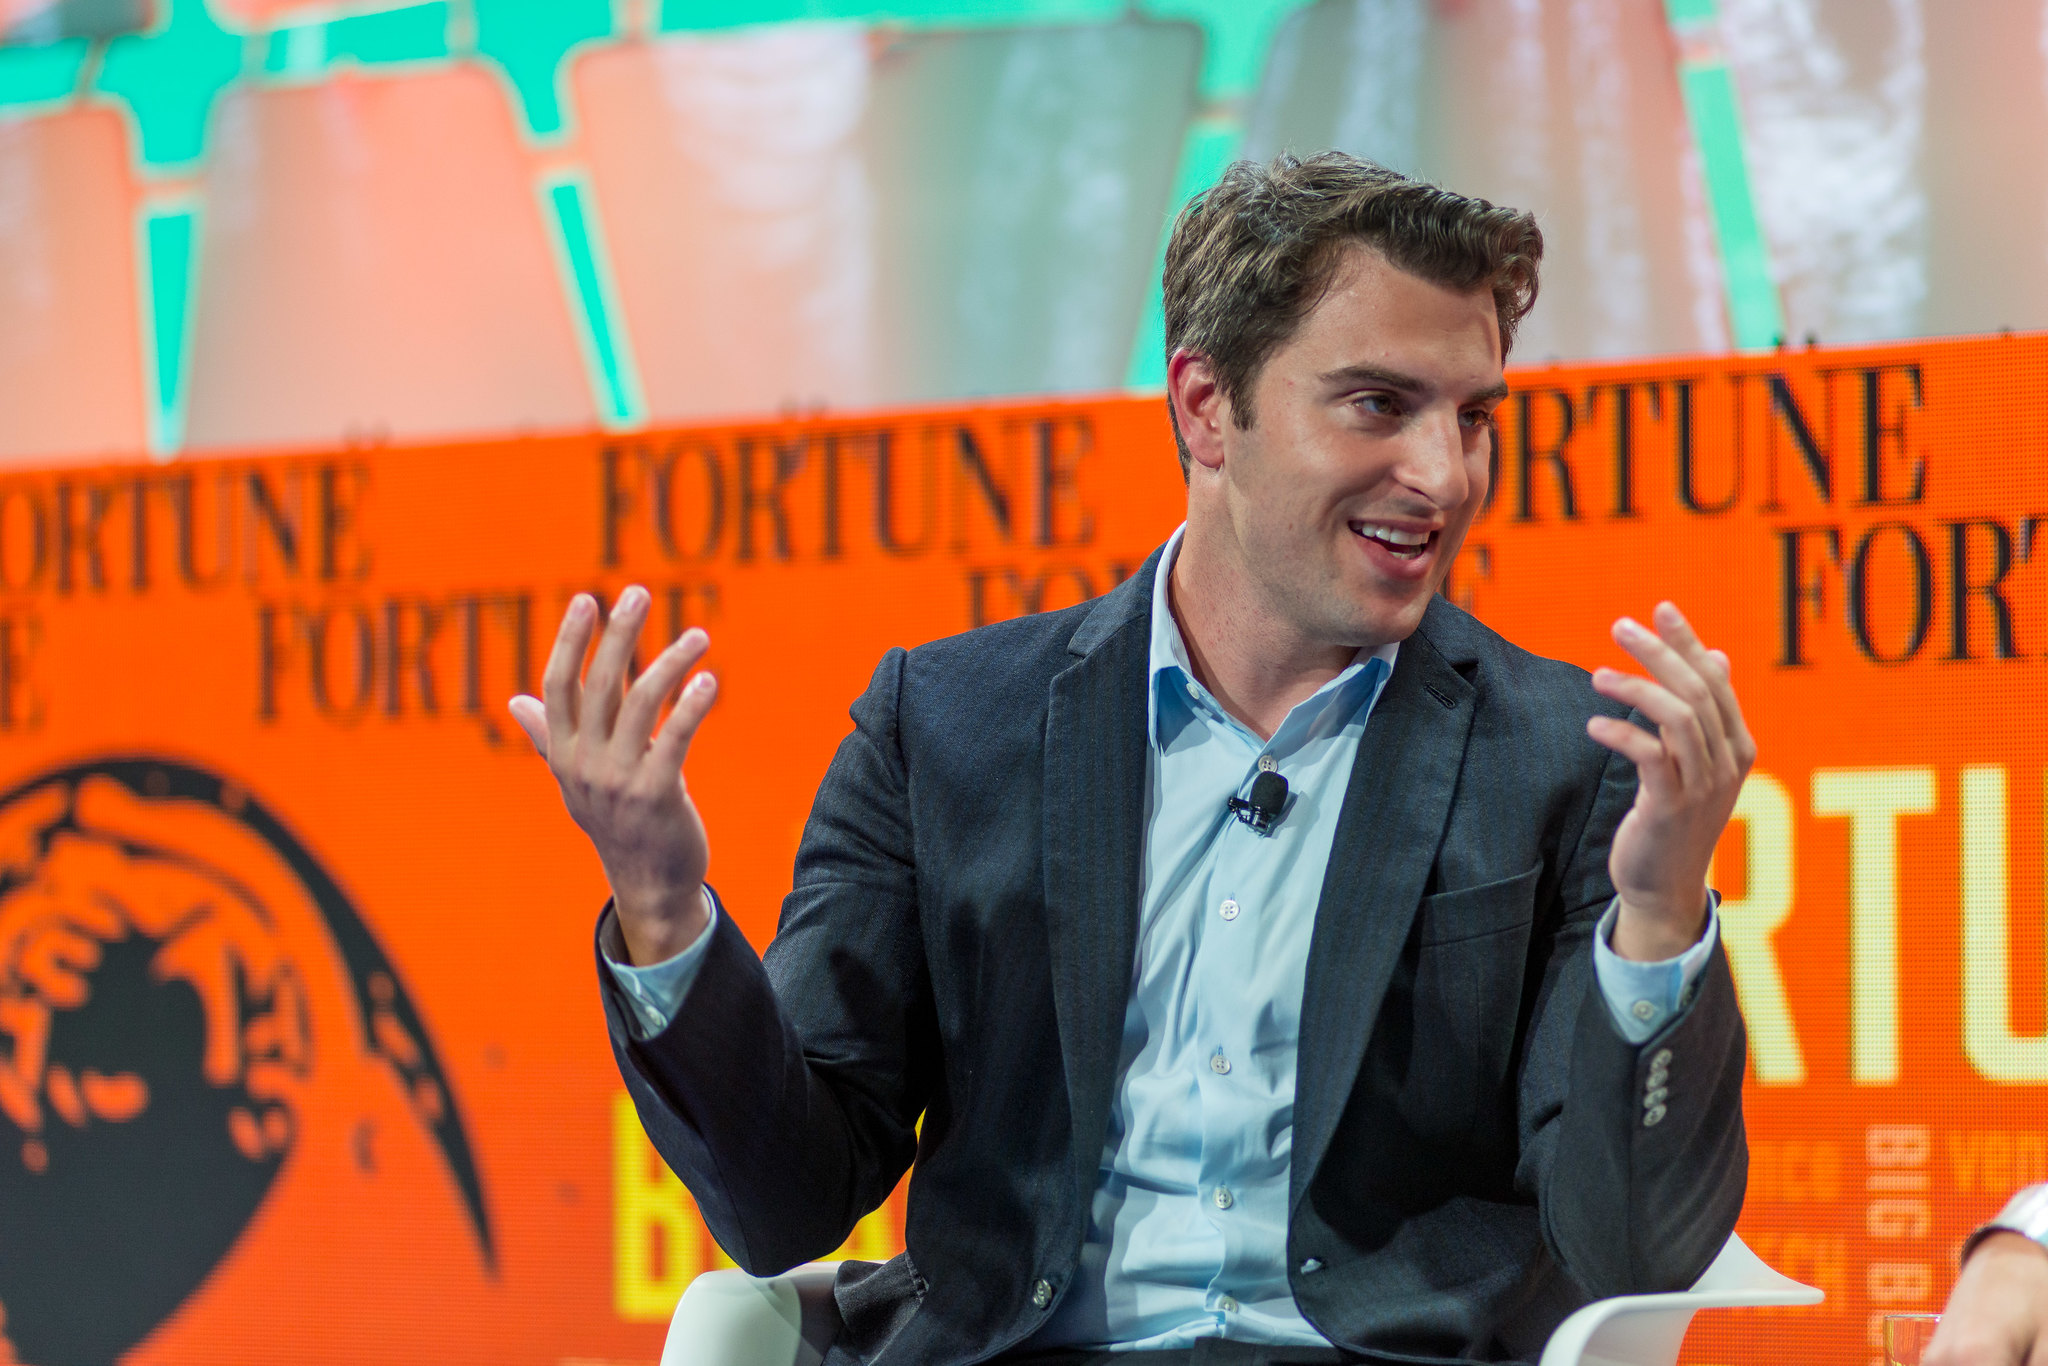 Airbnb's CEO Aims To Live As A Digital Nomad Across the U.S. in 2022